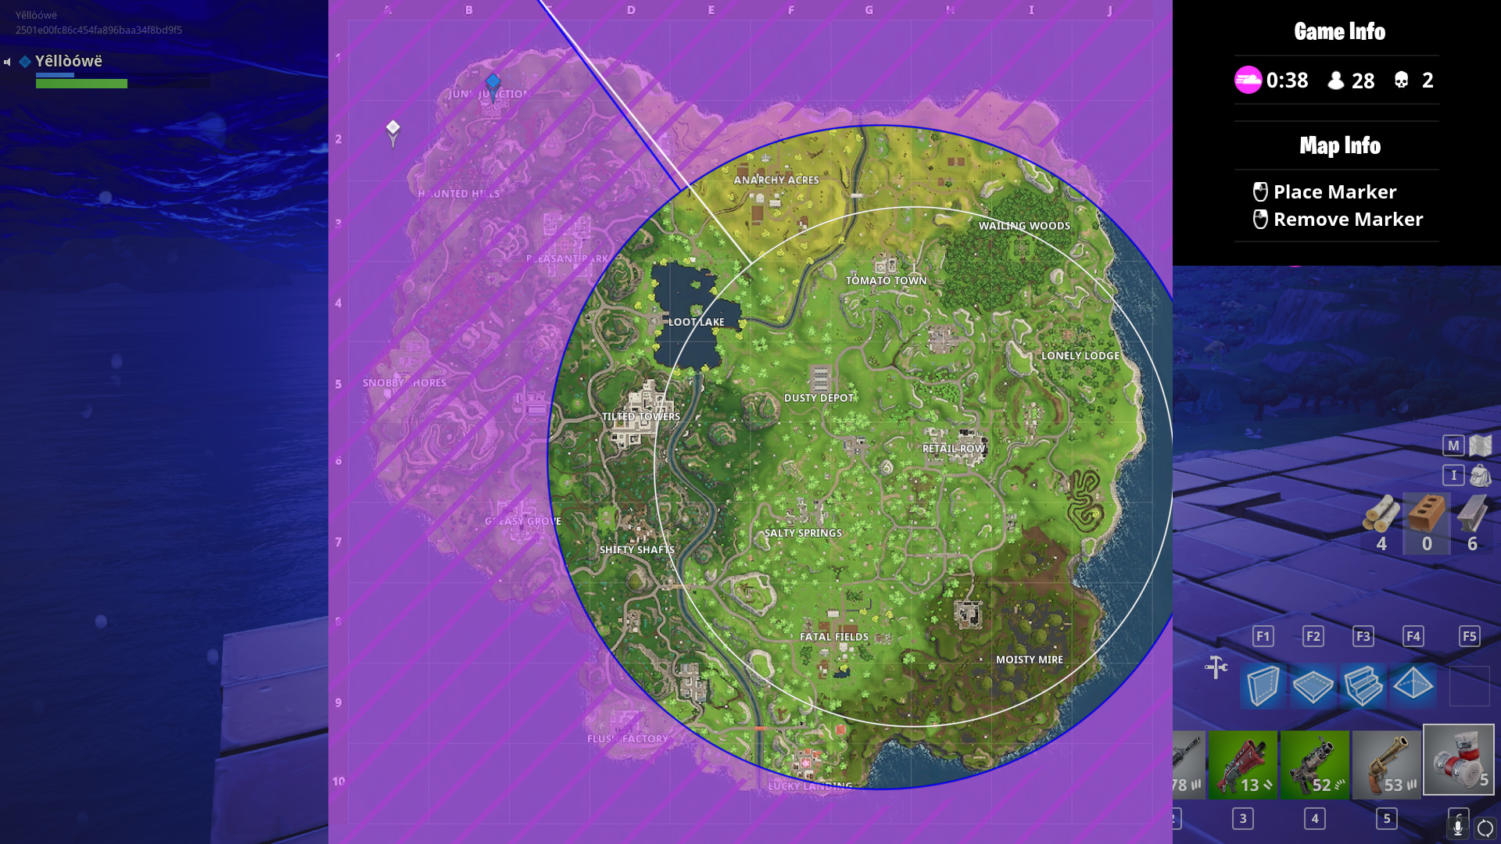 What S The Fuss About Fortnite The Oak Leaf - the blue circle represents the boundary of the storm the purple shaded area is the storm and the white circle is where the storm will be once the next